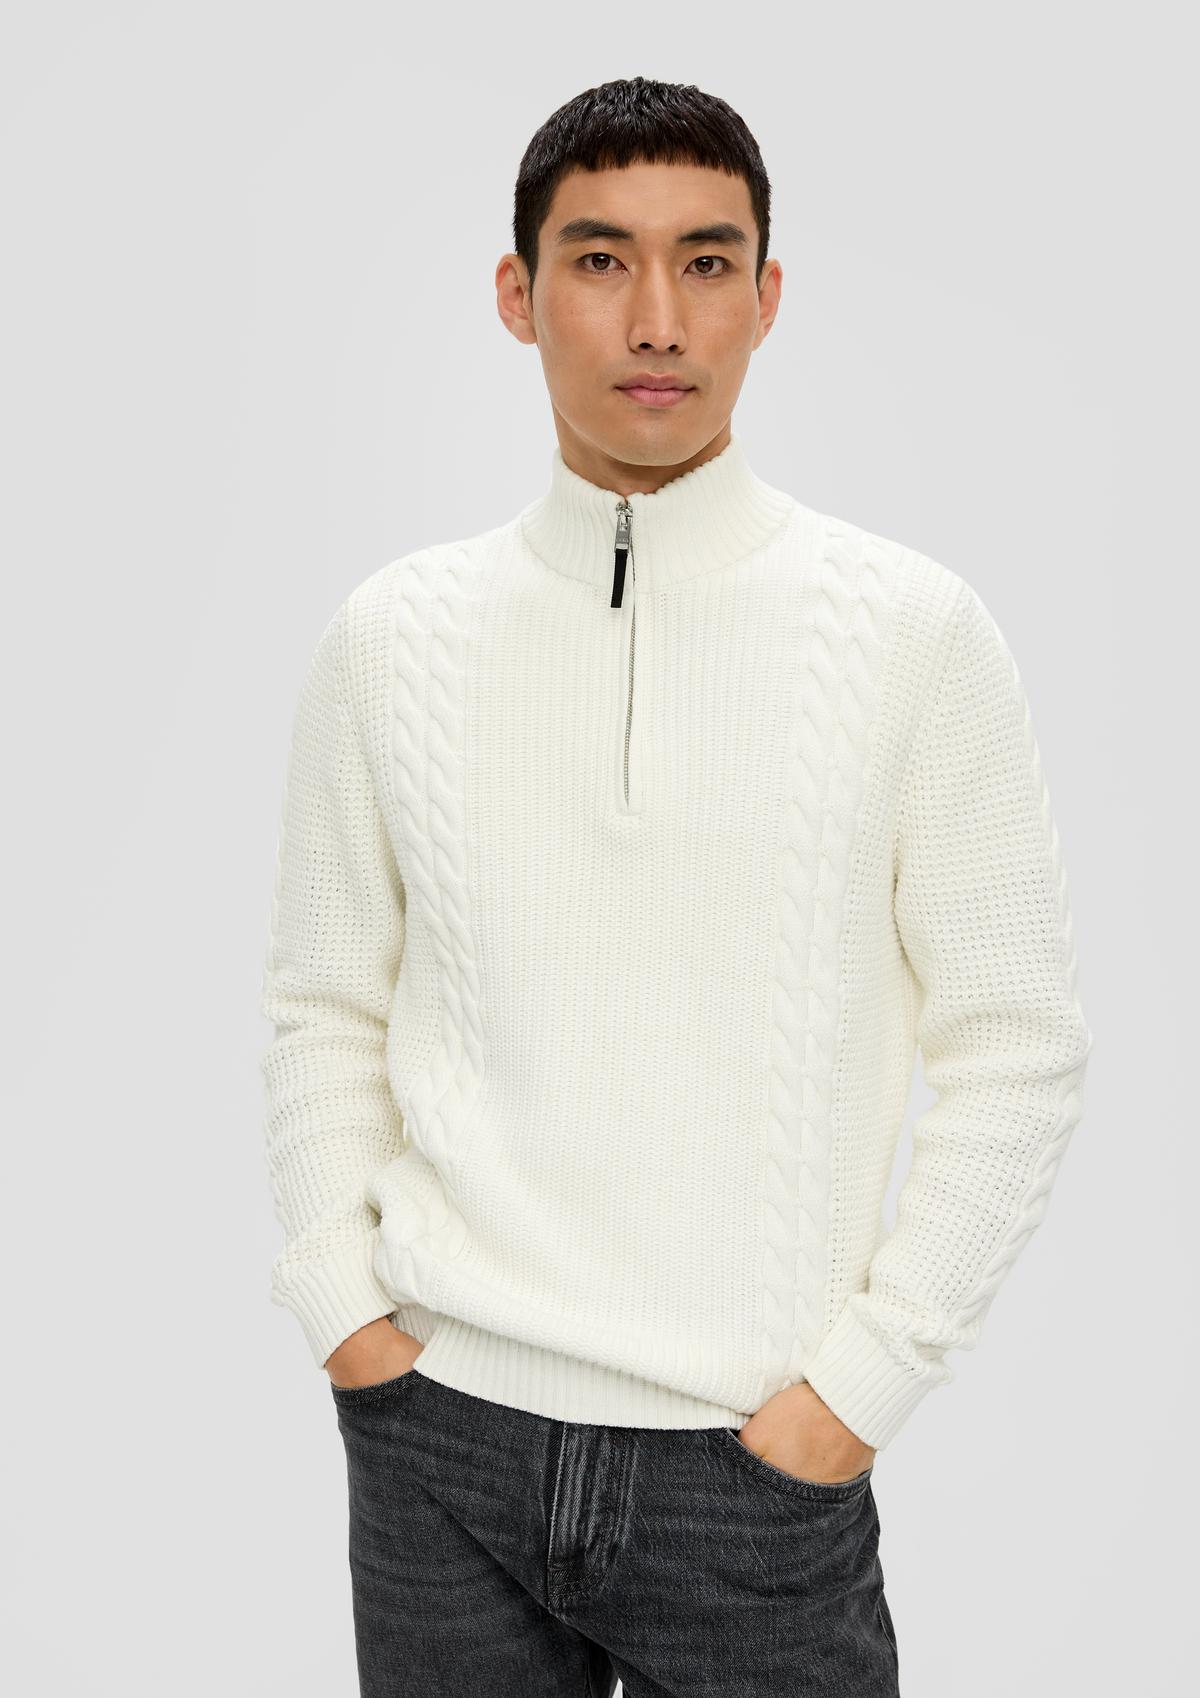 Sleeveless half-zip jumper with a cable knit pattern